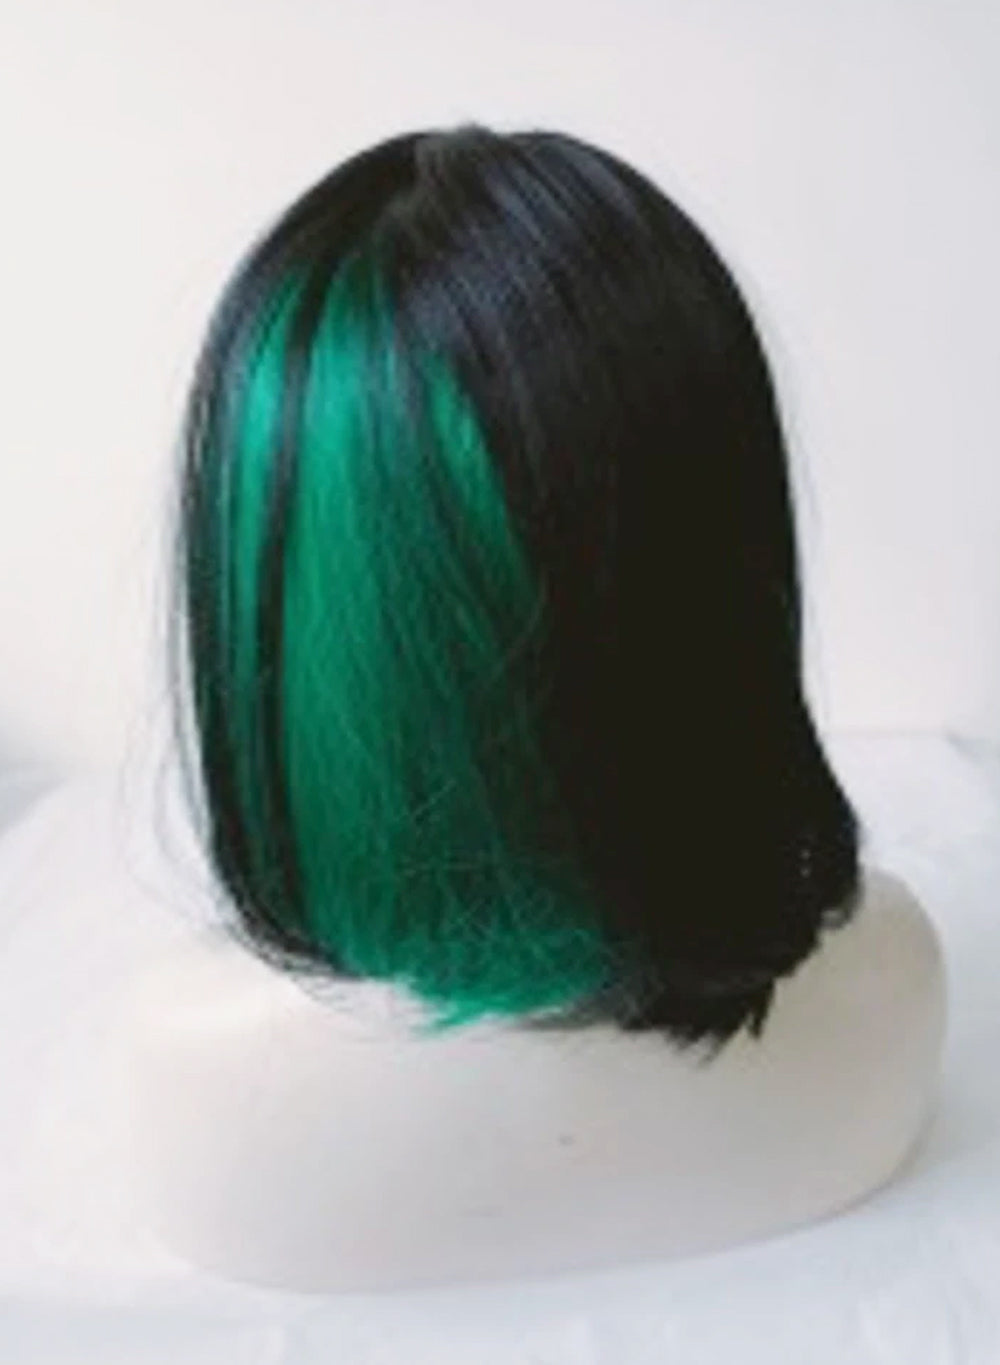 Two Tone Wig for Women Black & Emerald Green